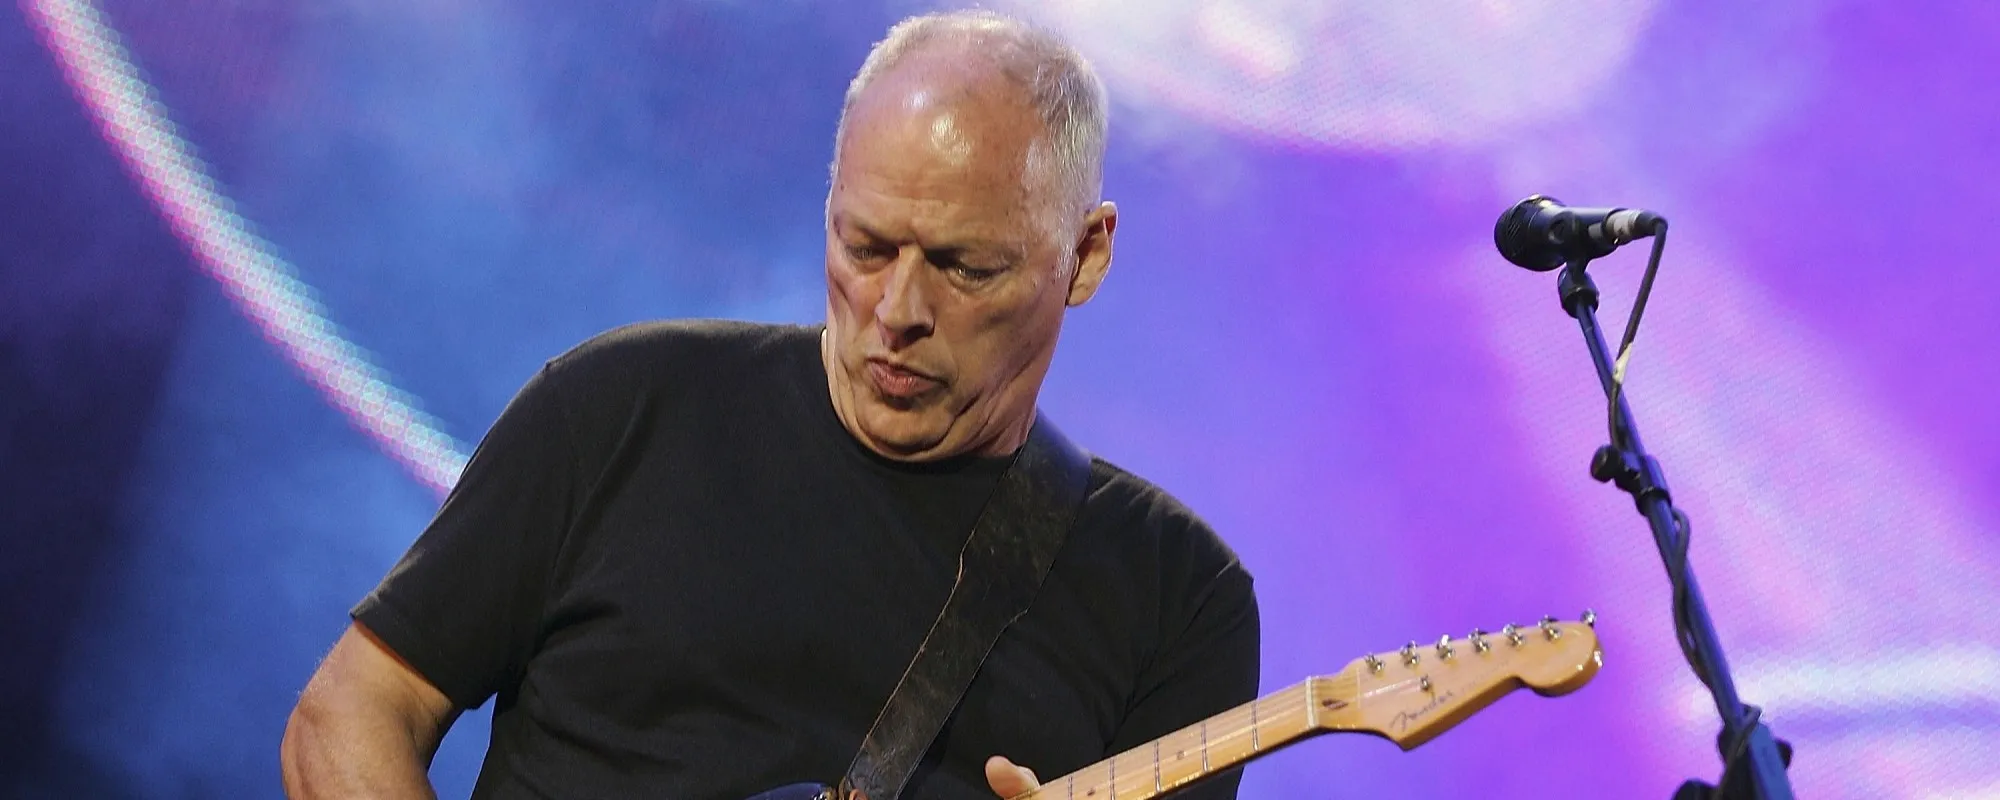 Check Out 5 Notable David Gilmour Guest Performances in Honor of the Pink Floyd Guitarist’s Birthday